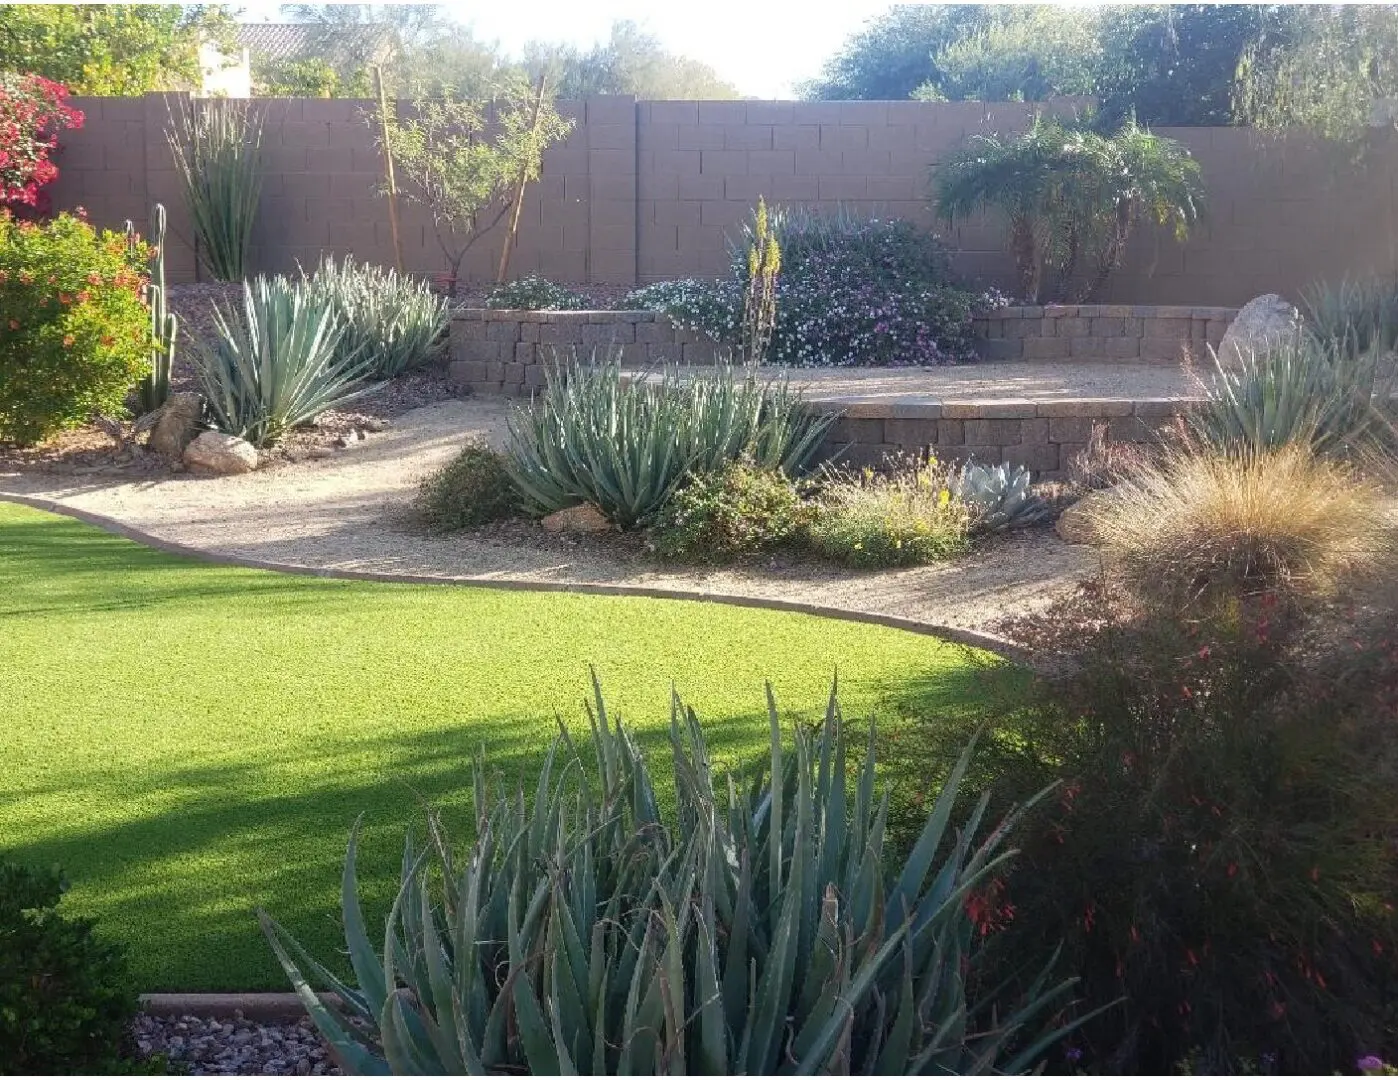 A backyard with grass and plants in it